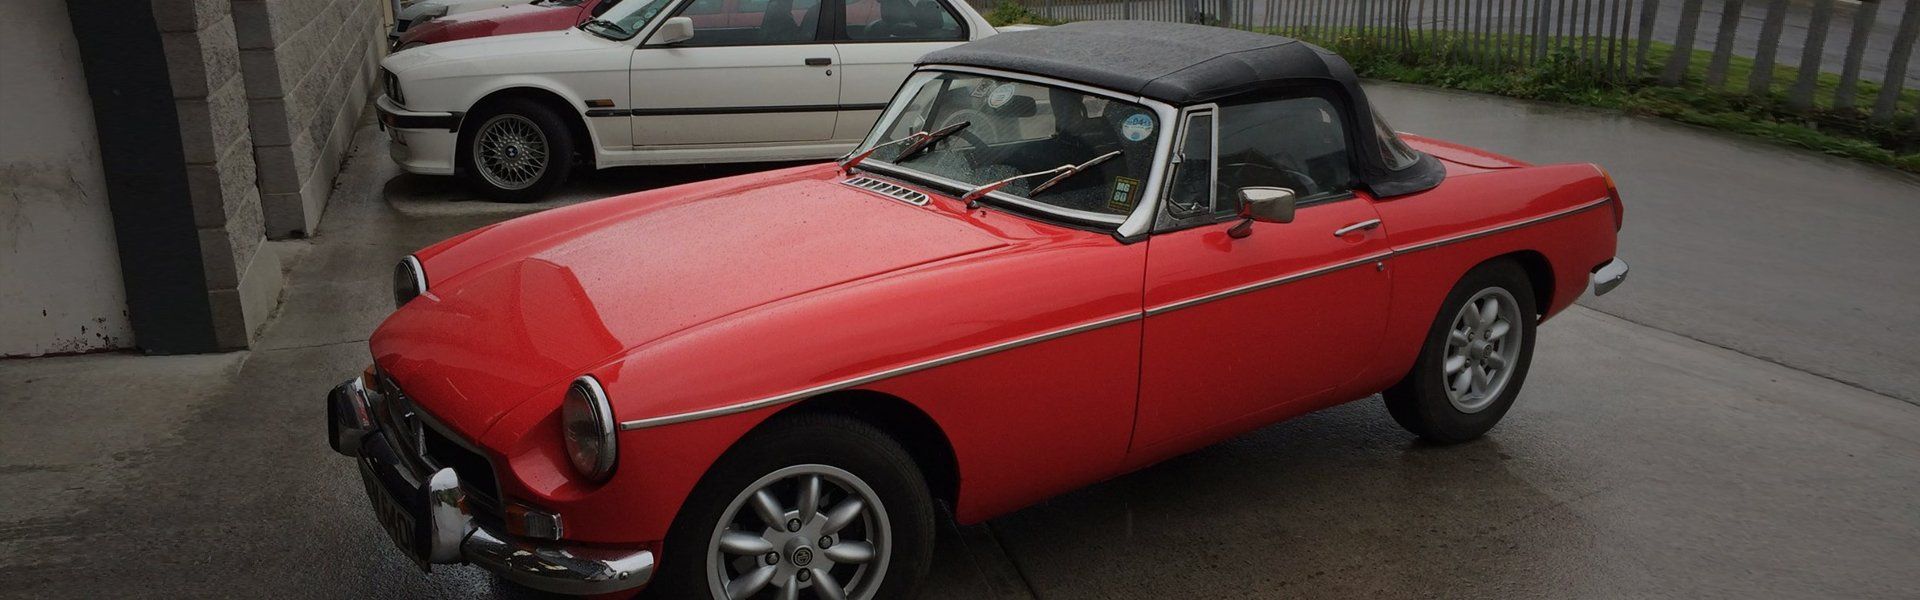 Efficient classic car repair services in and around Newtownards